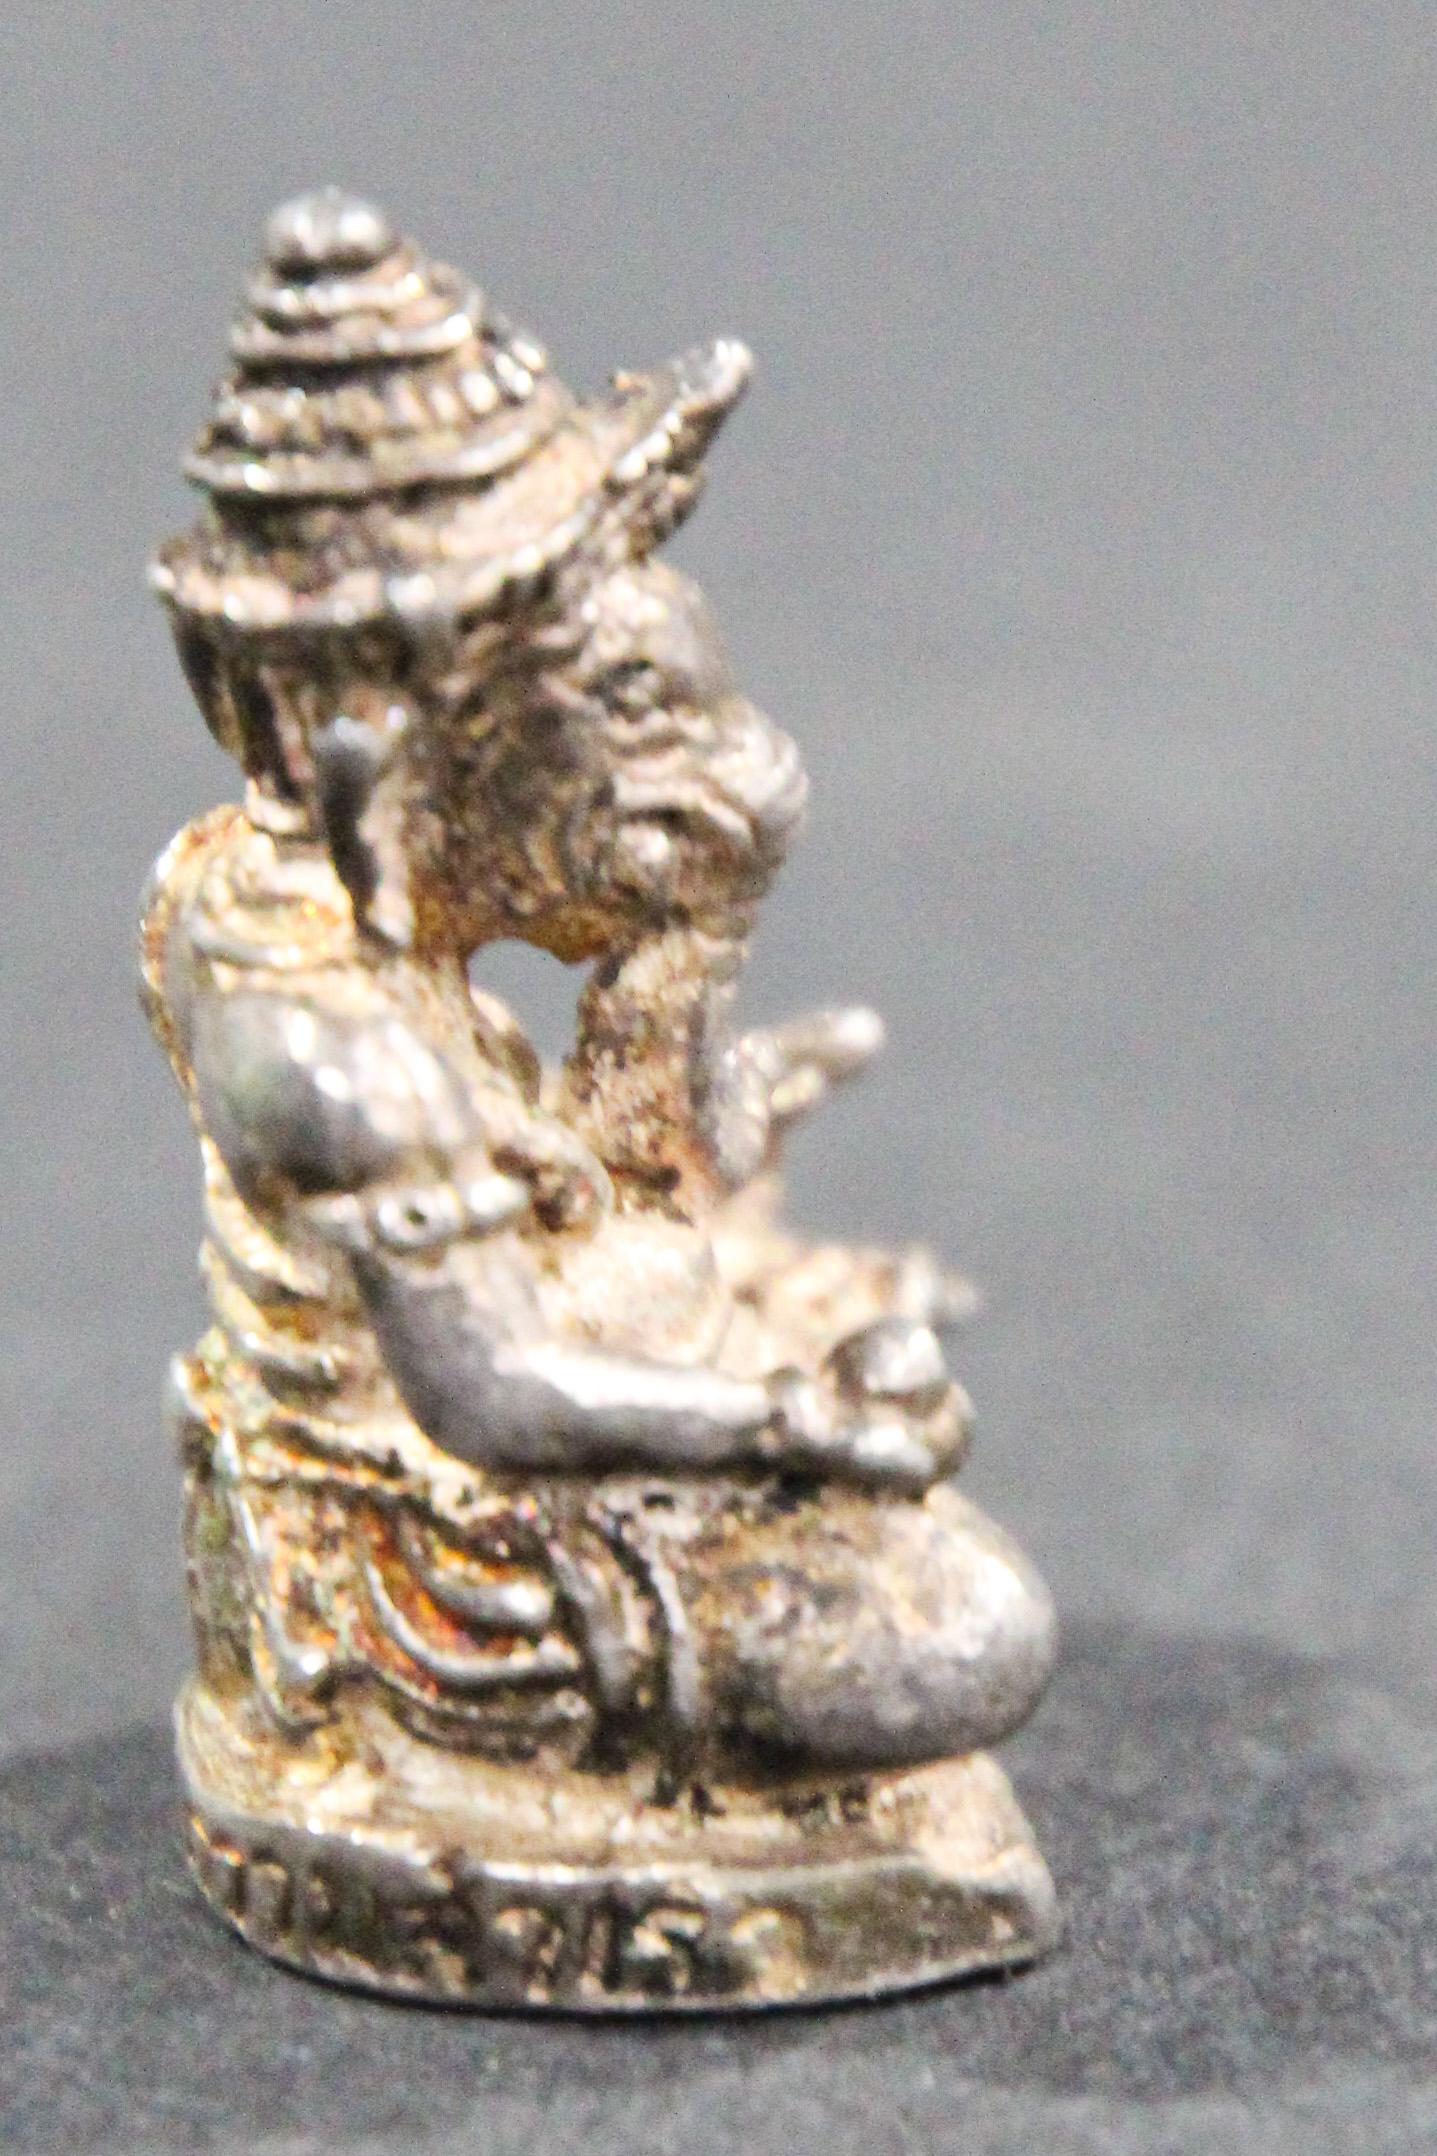 Ganesh Small Silver Hindu Diety Statue Amulet For Sale 11